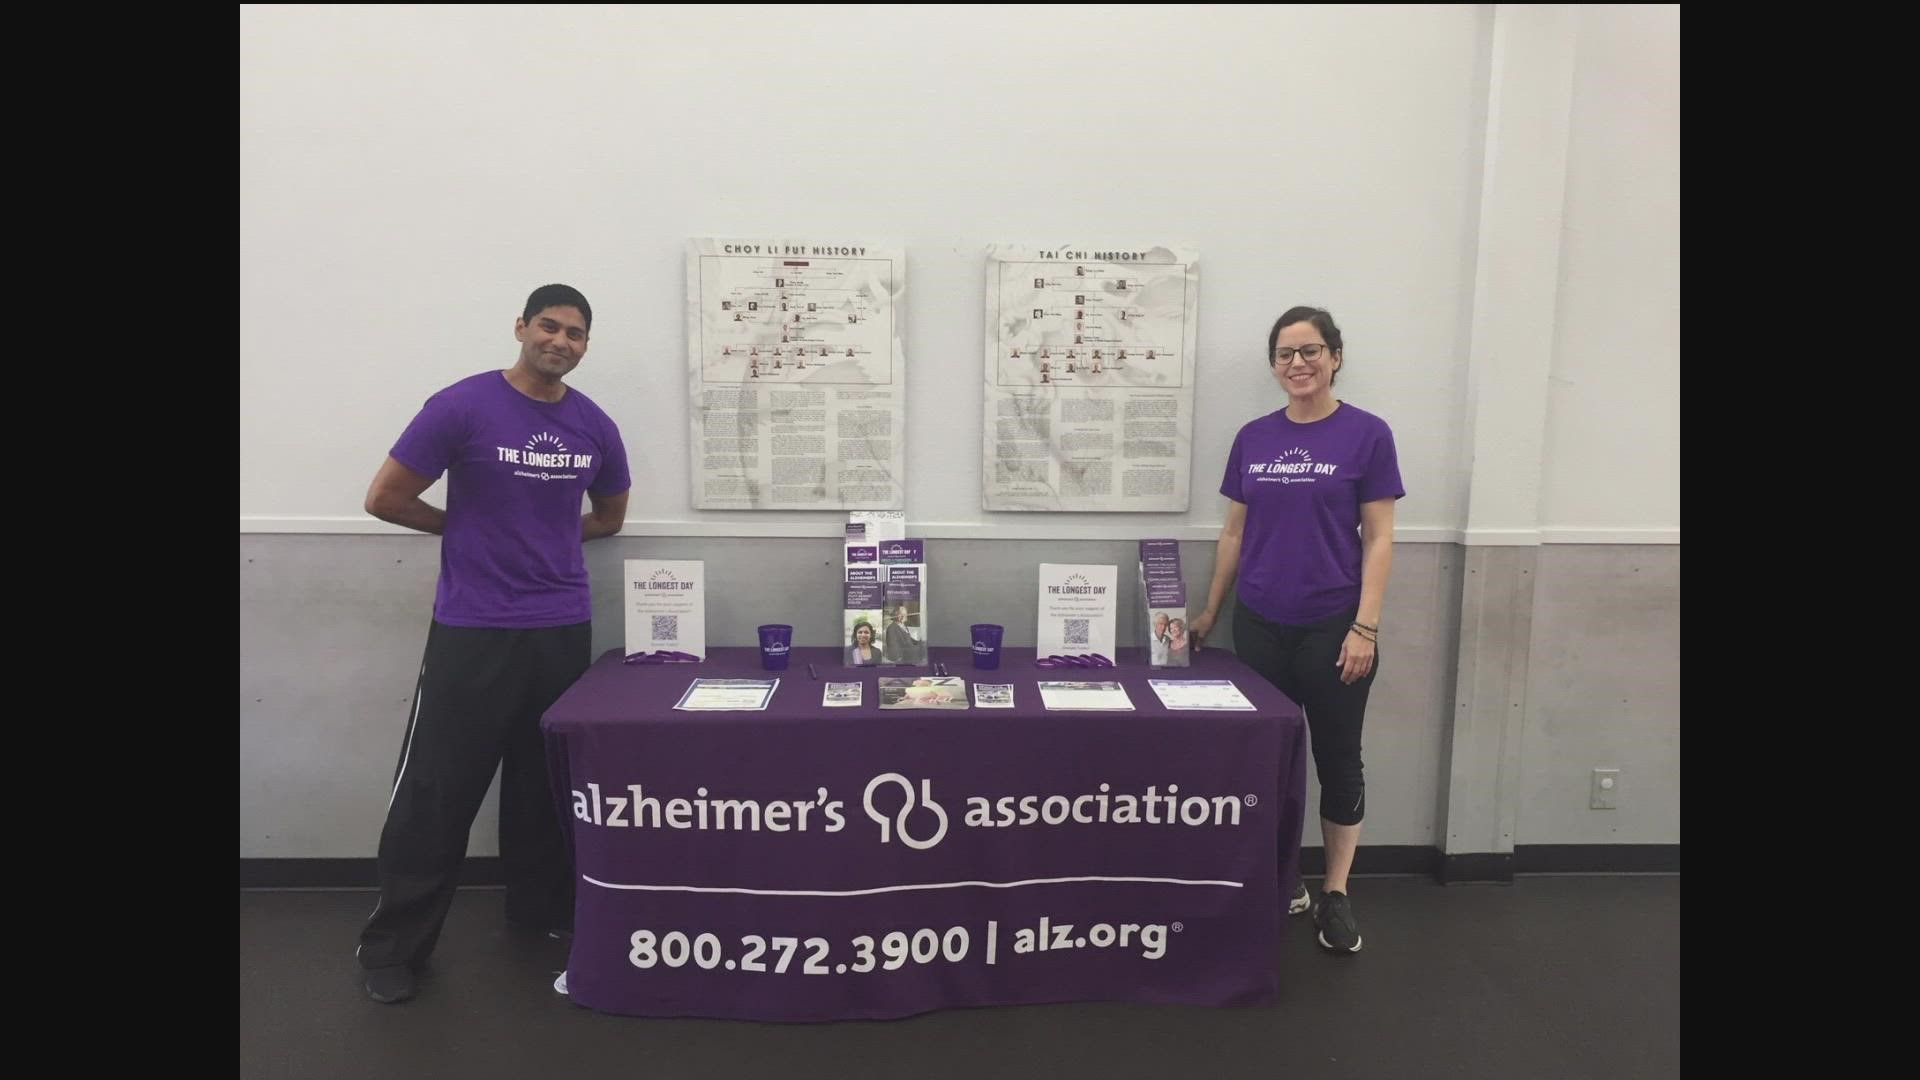 Thousands of participants around the world come together for the summer solstice to share their fight against Alzheimer's.